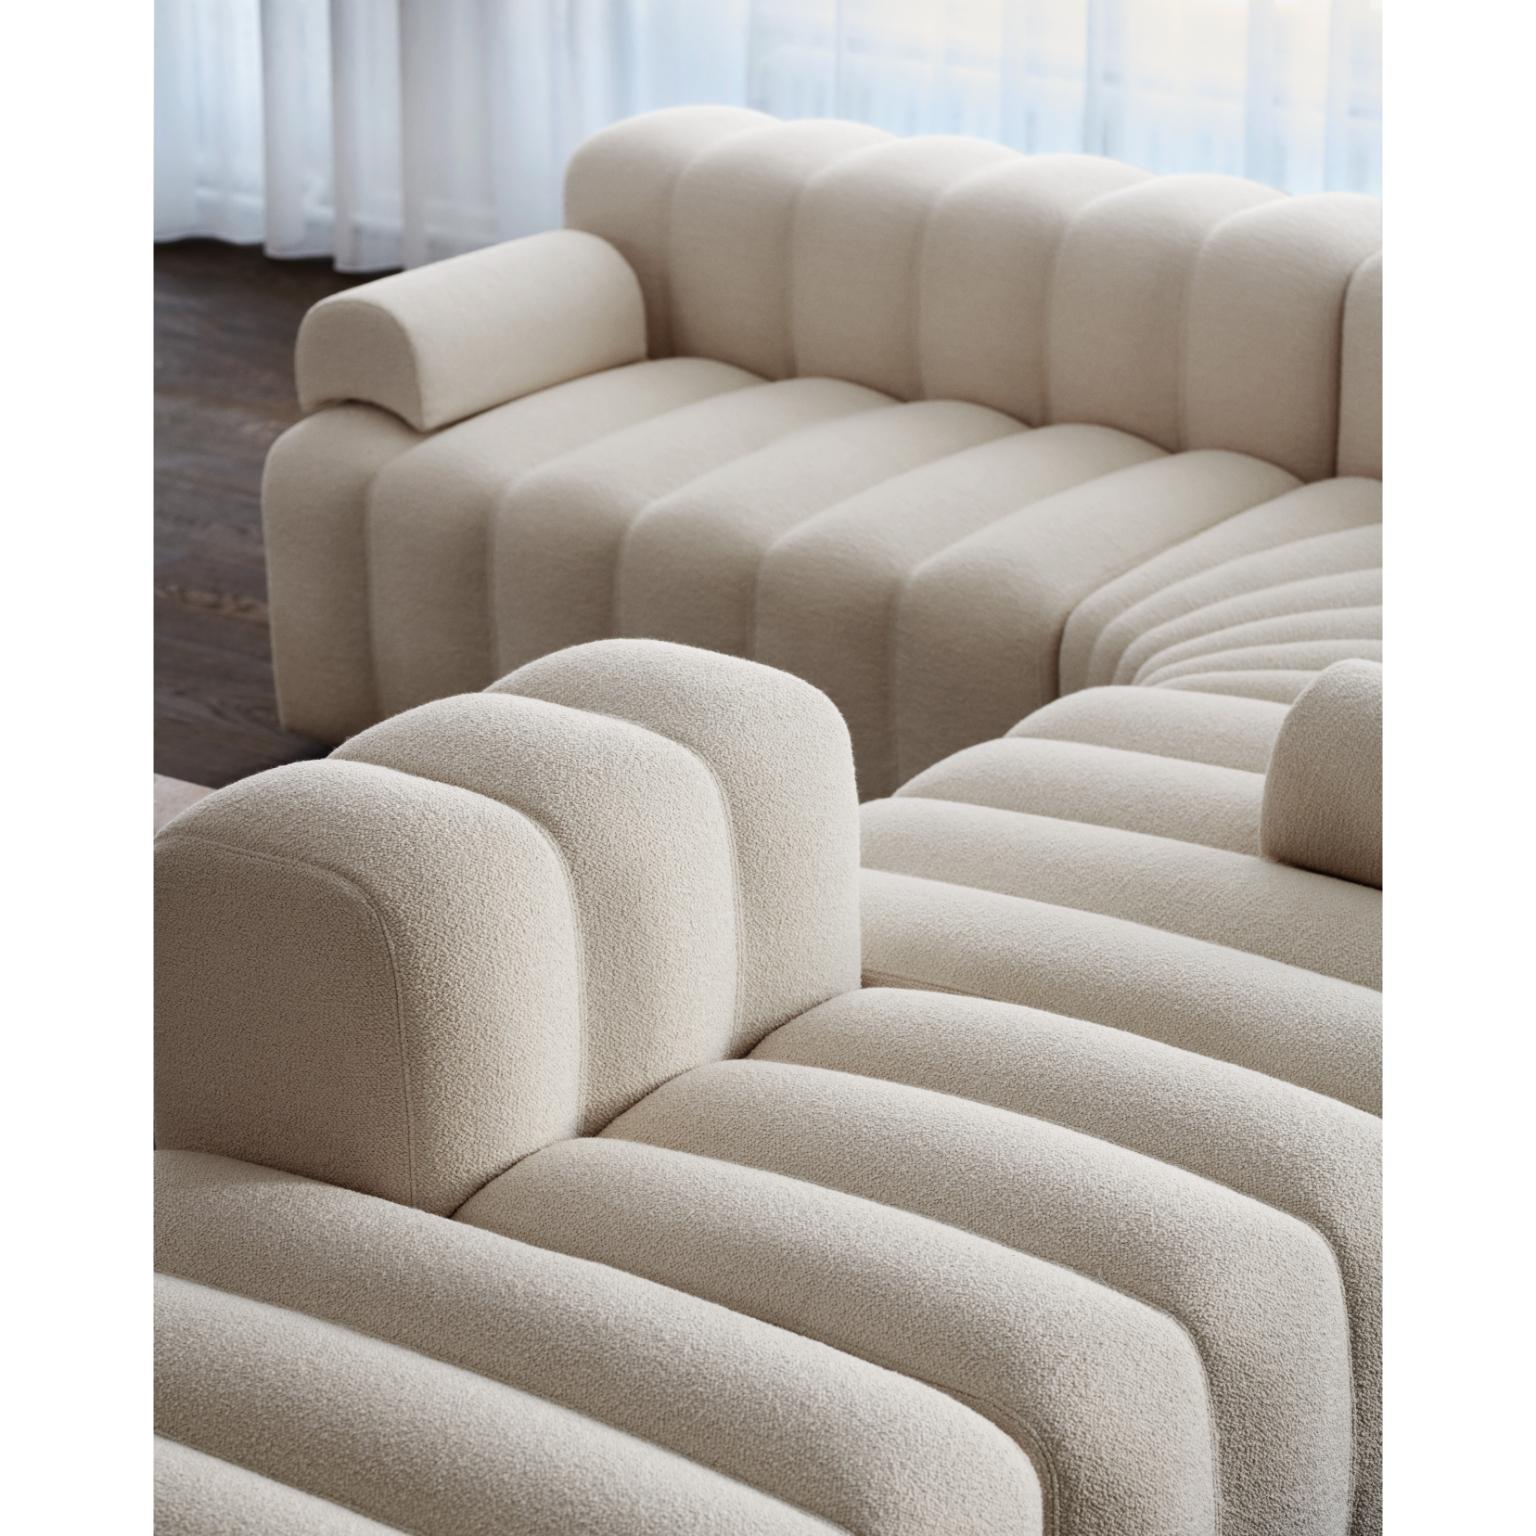 Studio Small Left Modular Sofa With Armrest by NORR11
Dimensions: D 96 x W 93 x H 70 cm. SH 47 cm. 
Materials: Foam, wood and upholstery.
Upholstery: Barnum Boucle Color 3.

Available in different upholstery options. A plywood structure with elastic